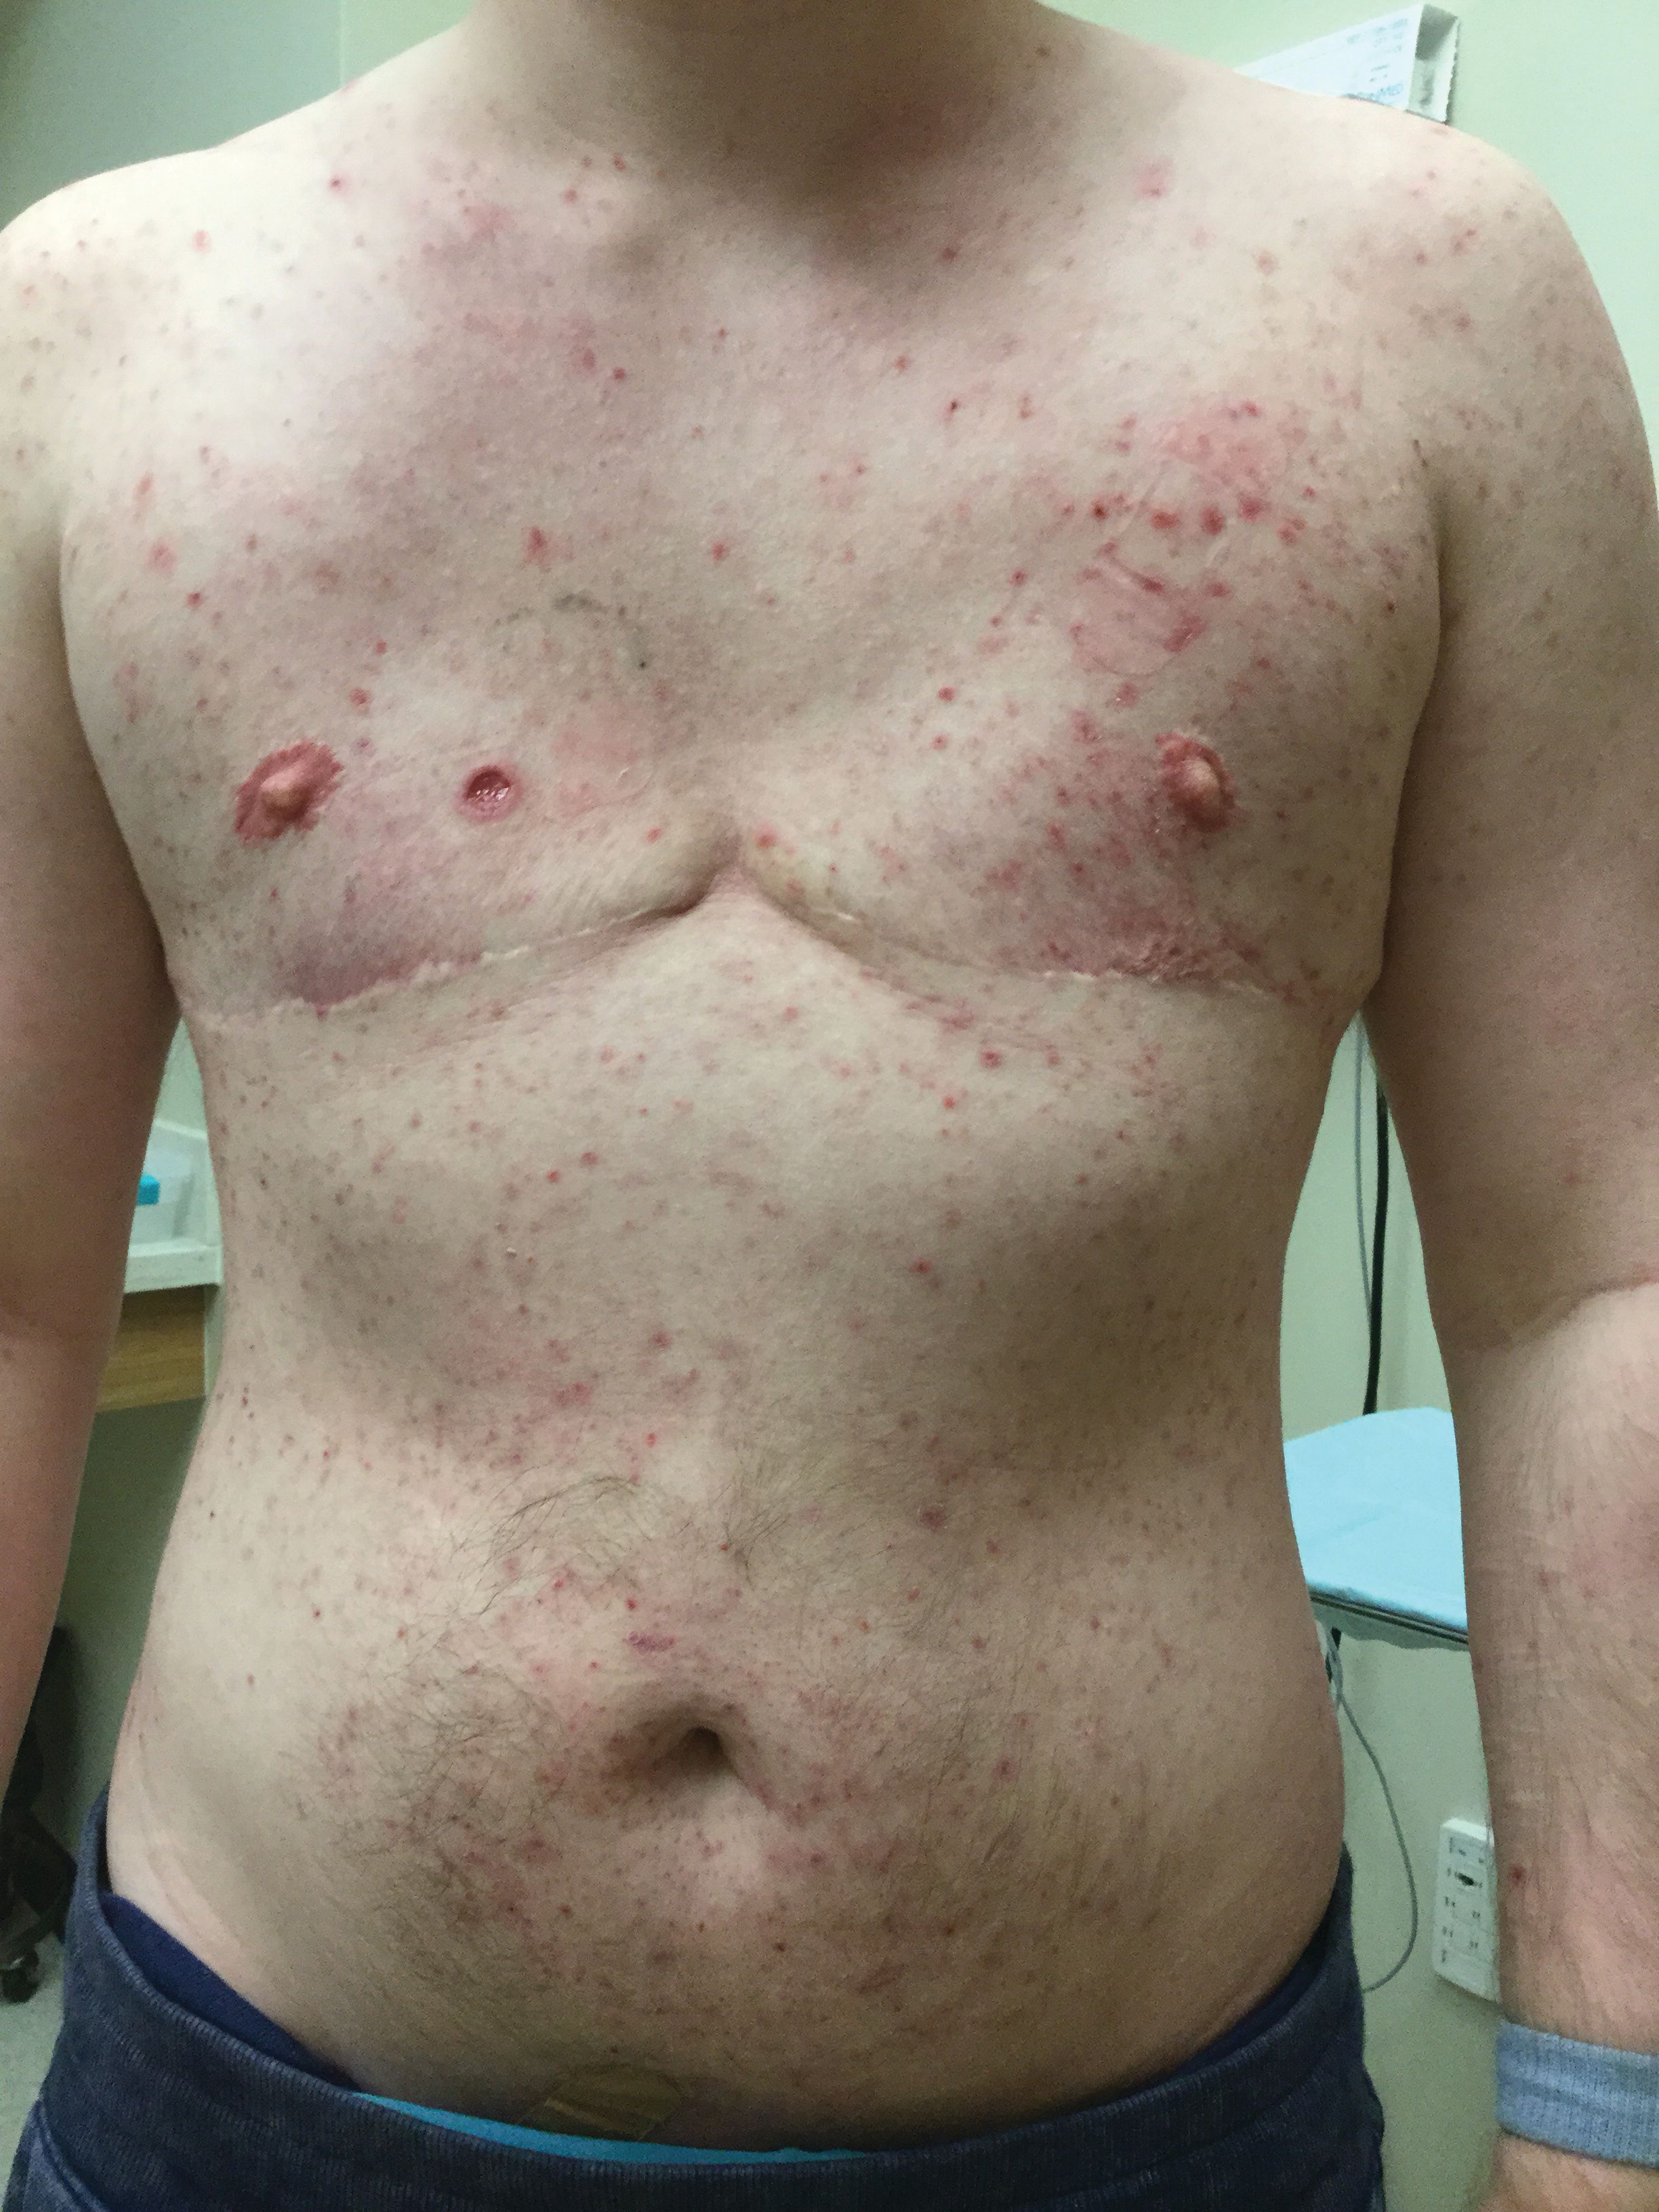 Widespread erythema, comedones, and large excoriated lesion on right breast